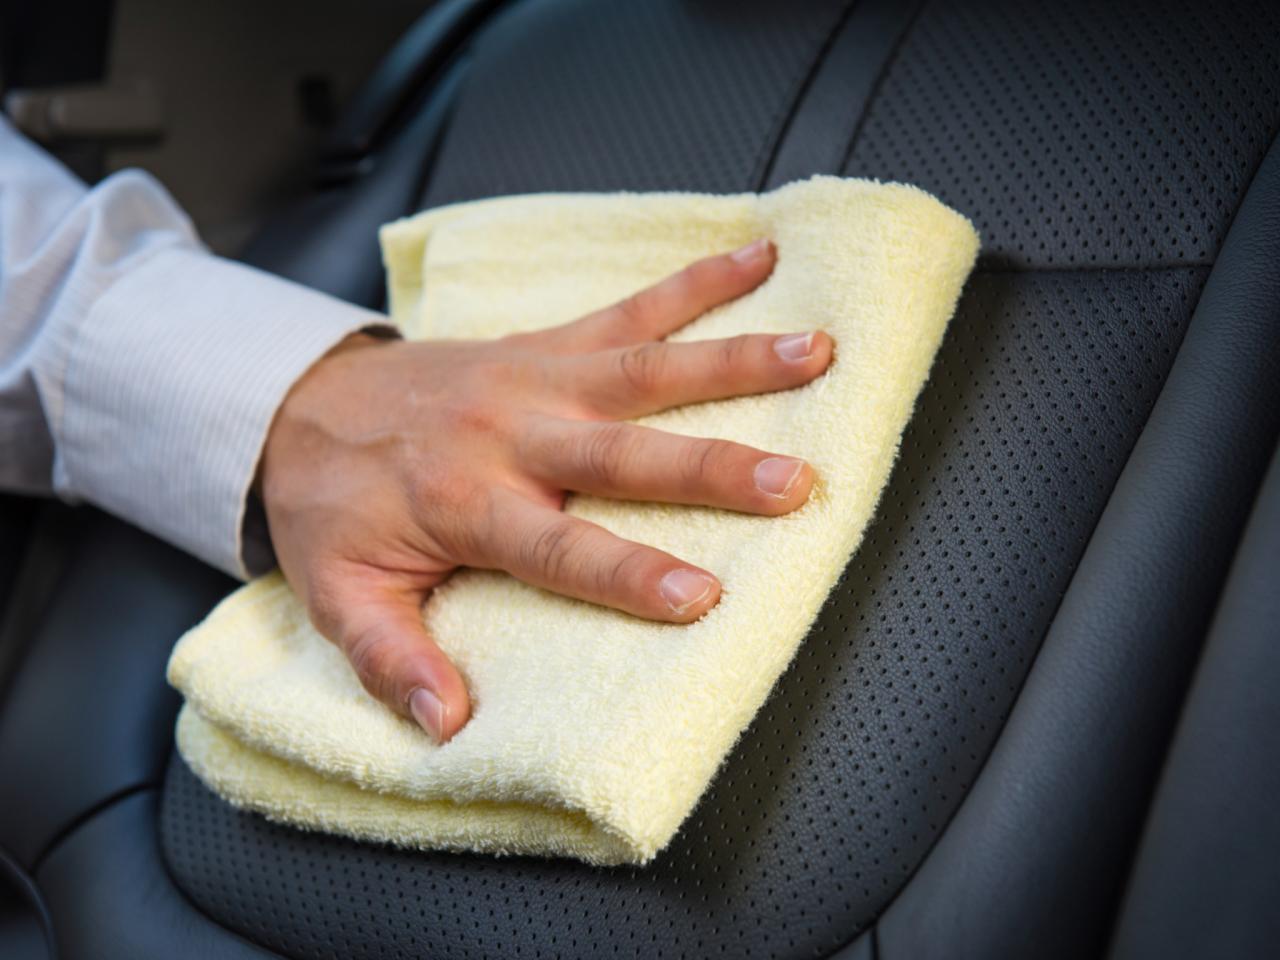 How To Clean Leather Car Seats - How To Clean Car Leather Seats